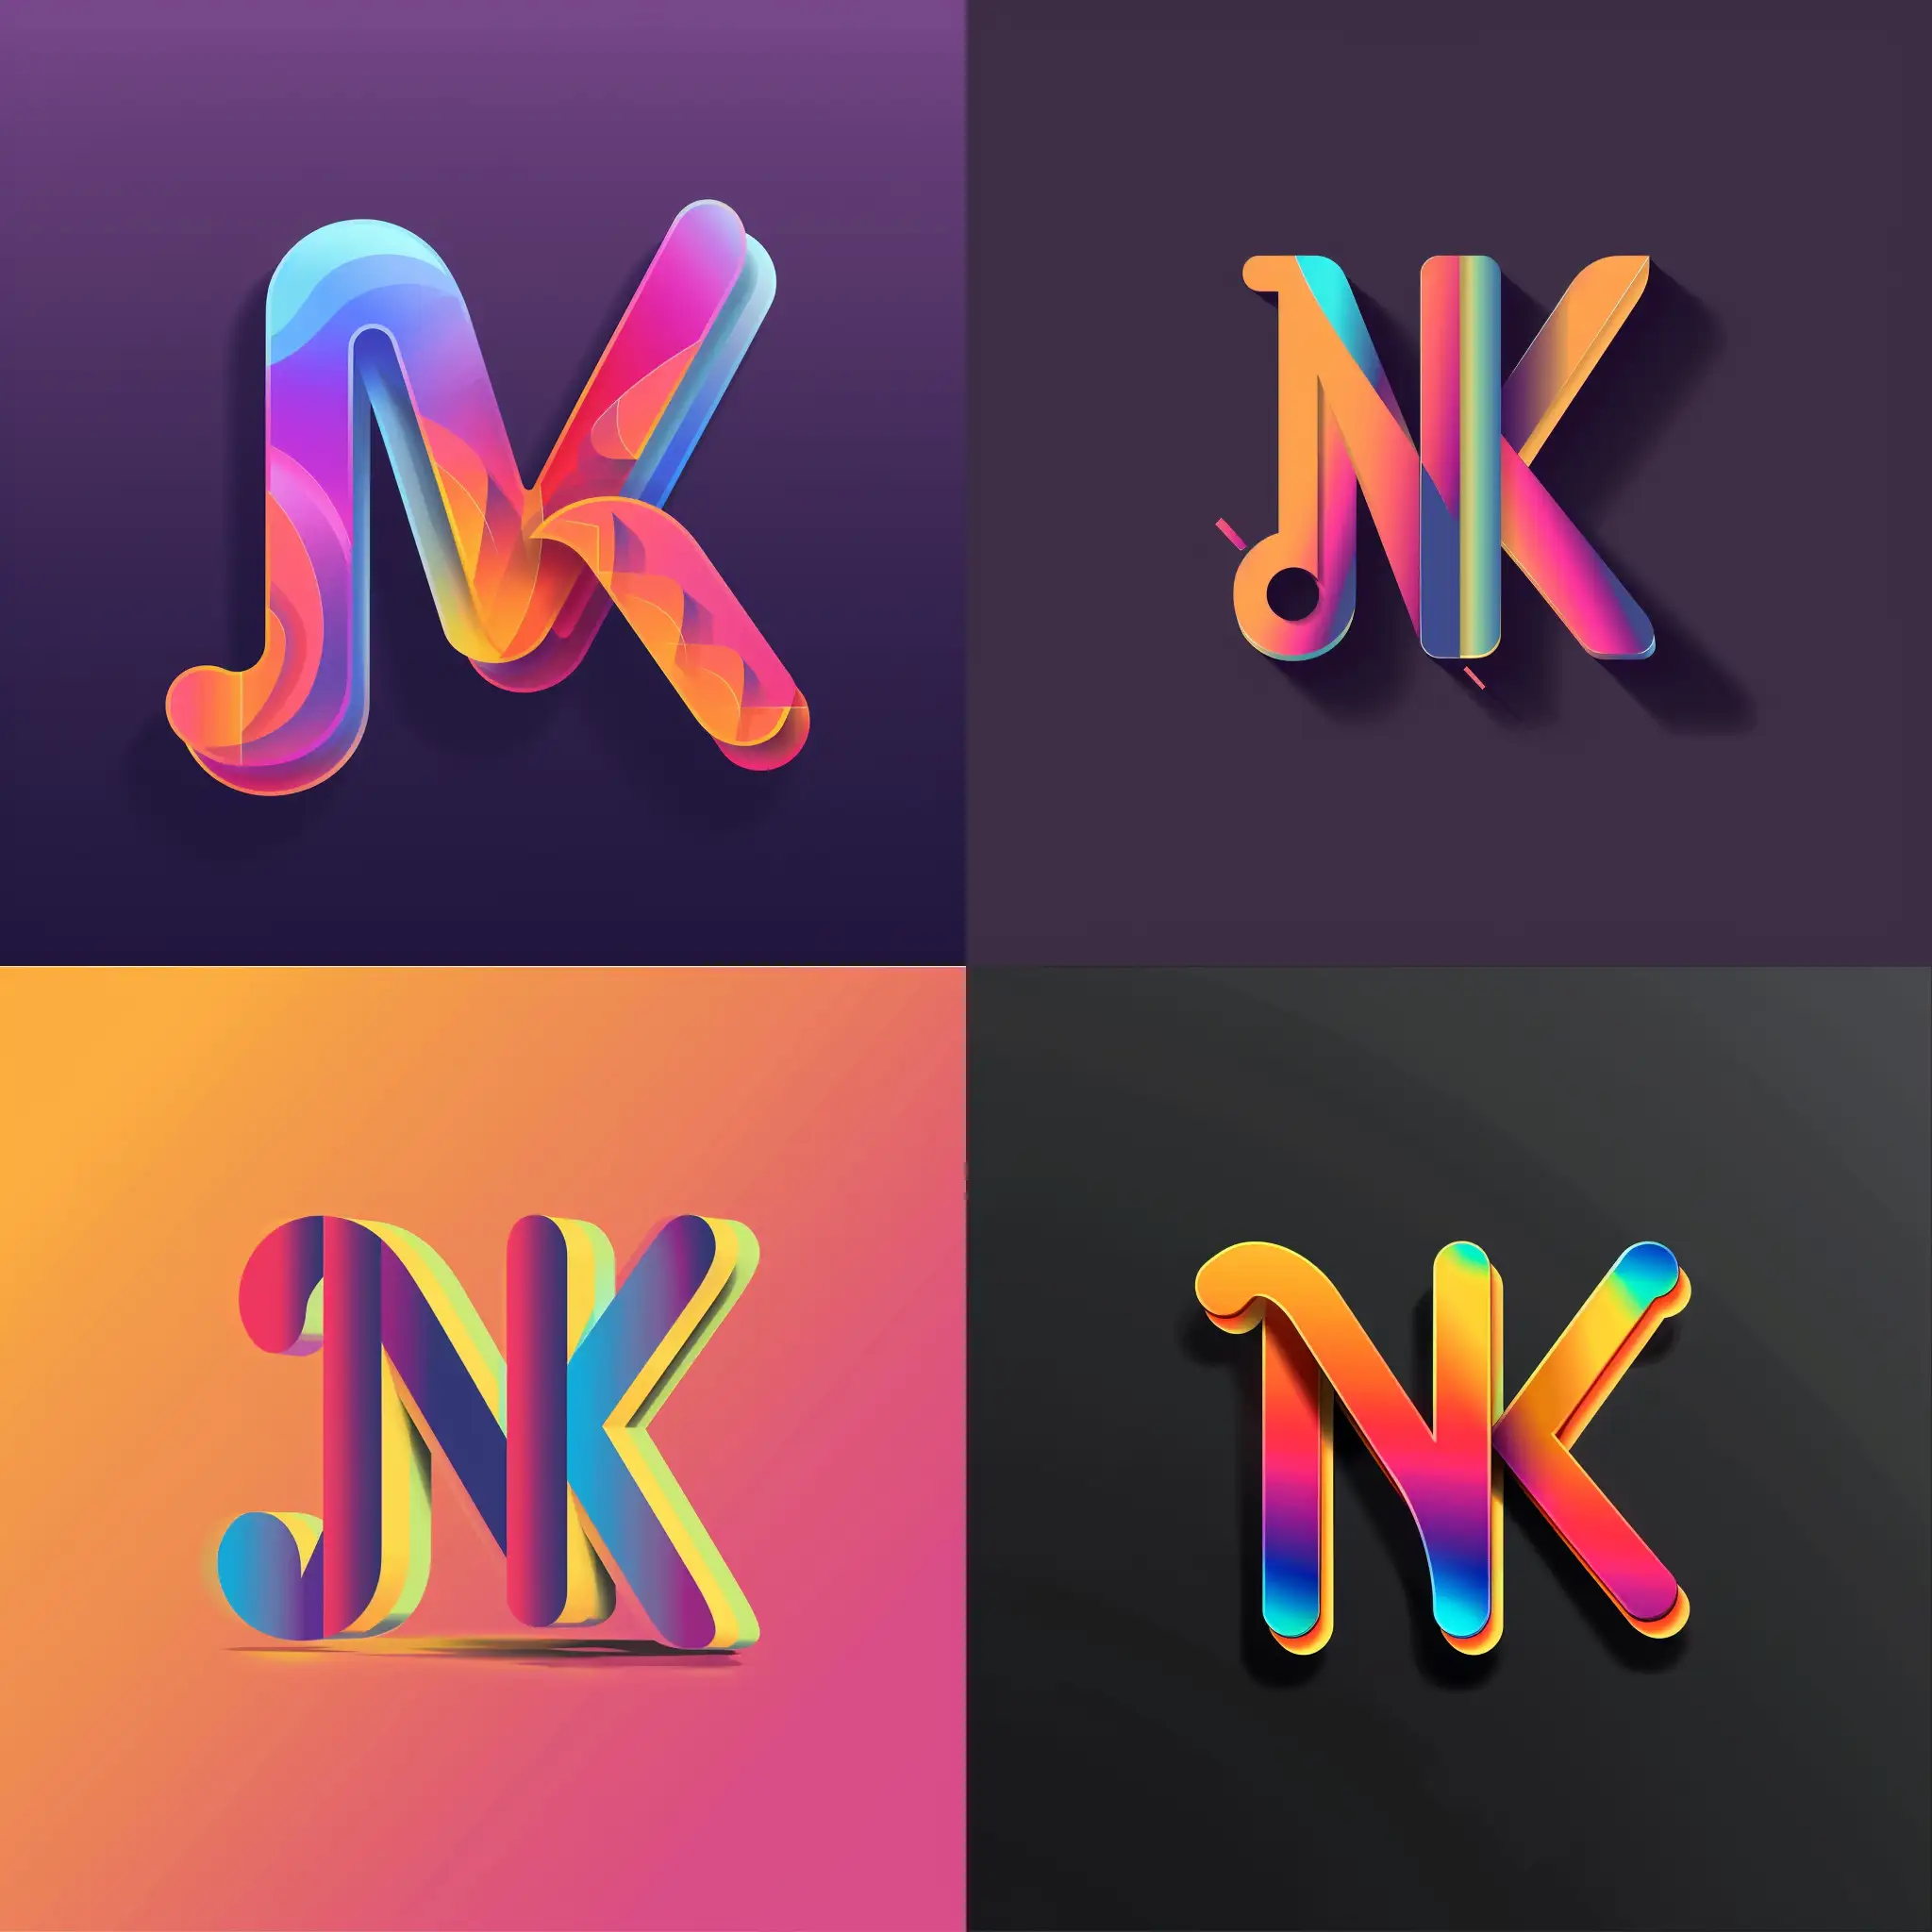 Multicolored-Minimalist-Music-App-Logo-with-Letter-N-and-K